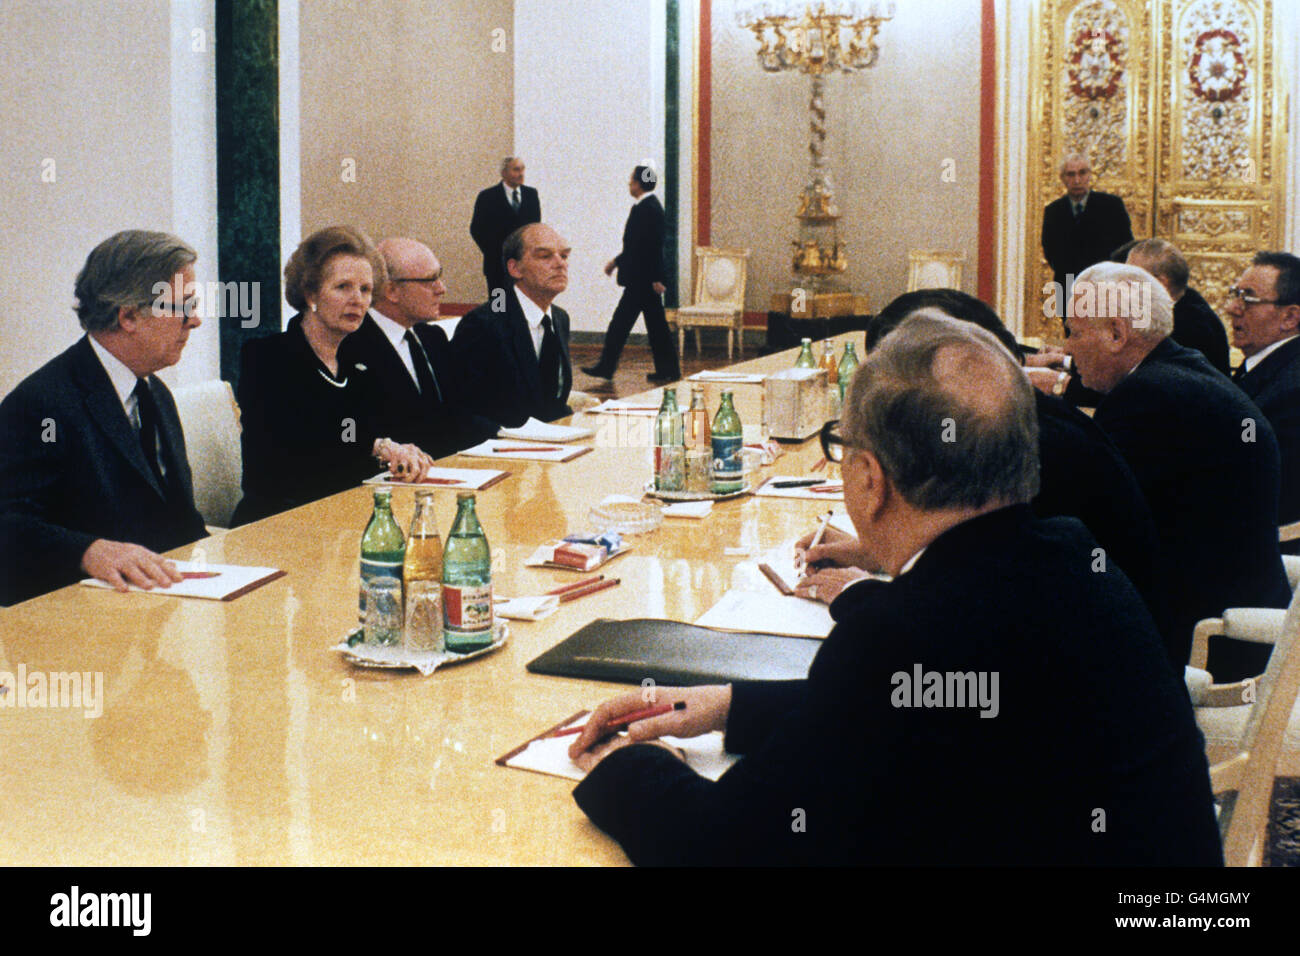 The British delegation with Mrs Margaret Thatcher (c) faces the Soviet delegation with Mr Chernenko (white hair). Far left is Sir Geoffrey Howe and extreme right is Andrei Gromyko, Soviet Foreign Minister. Stock Photo